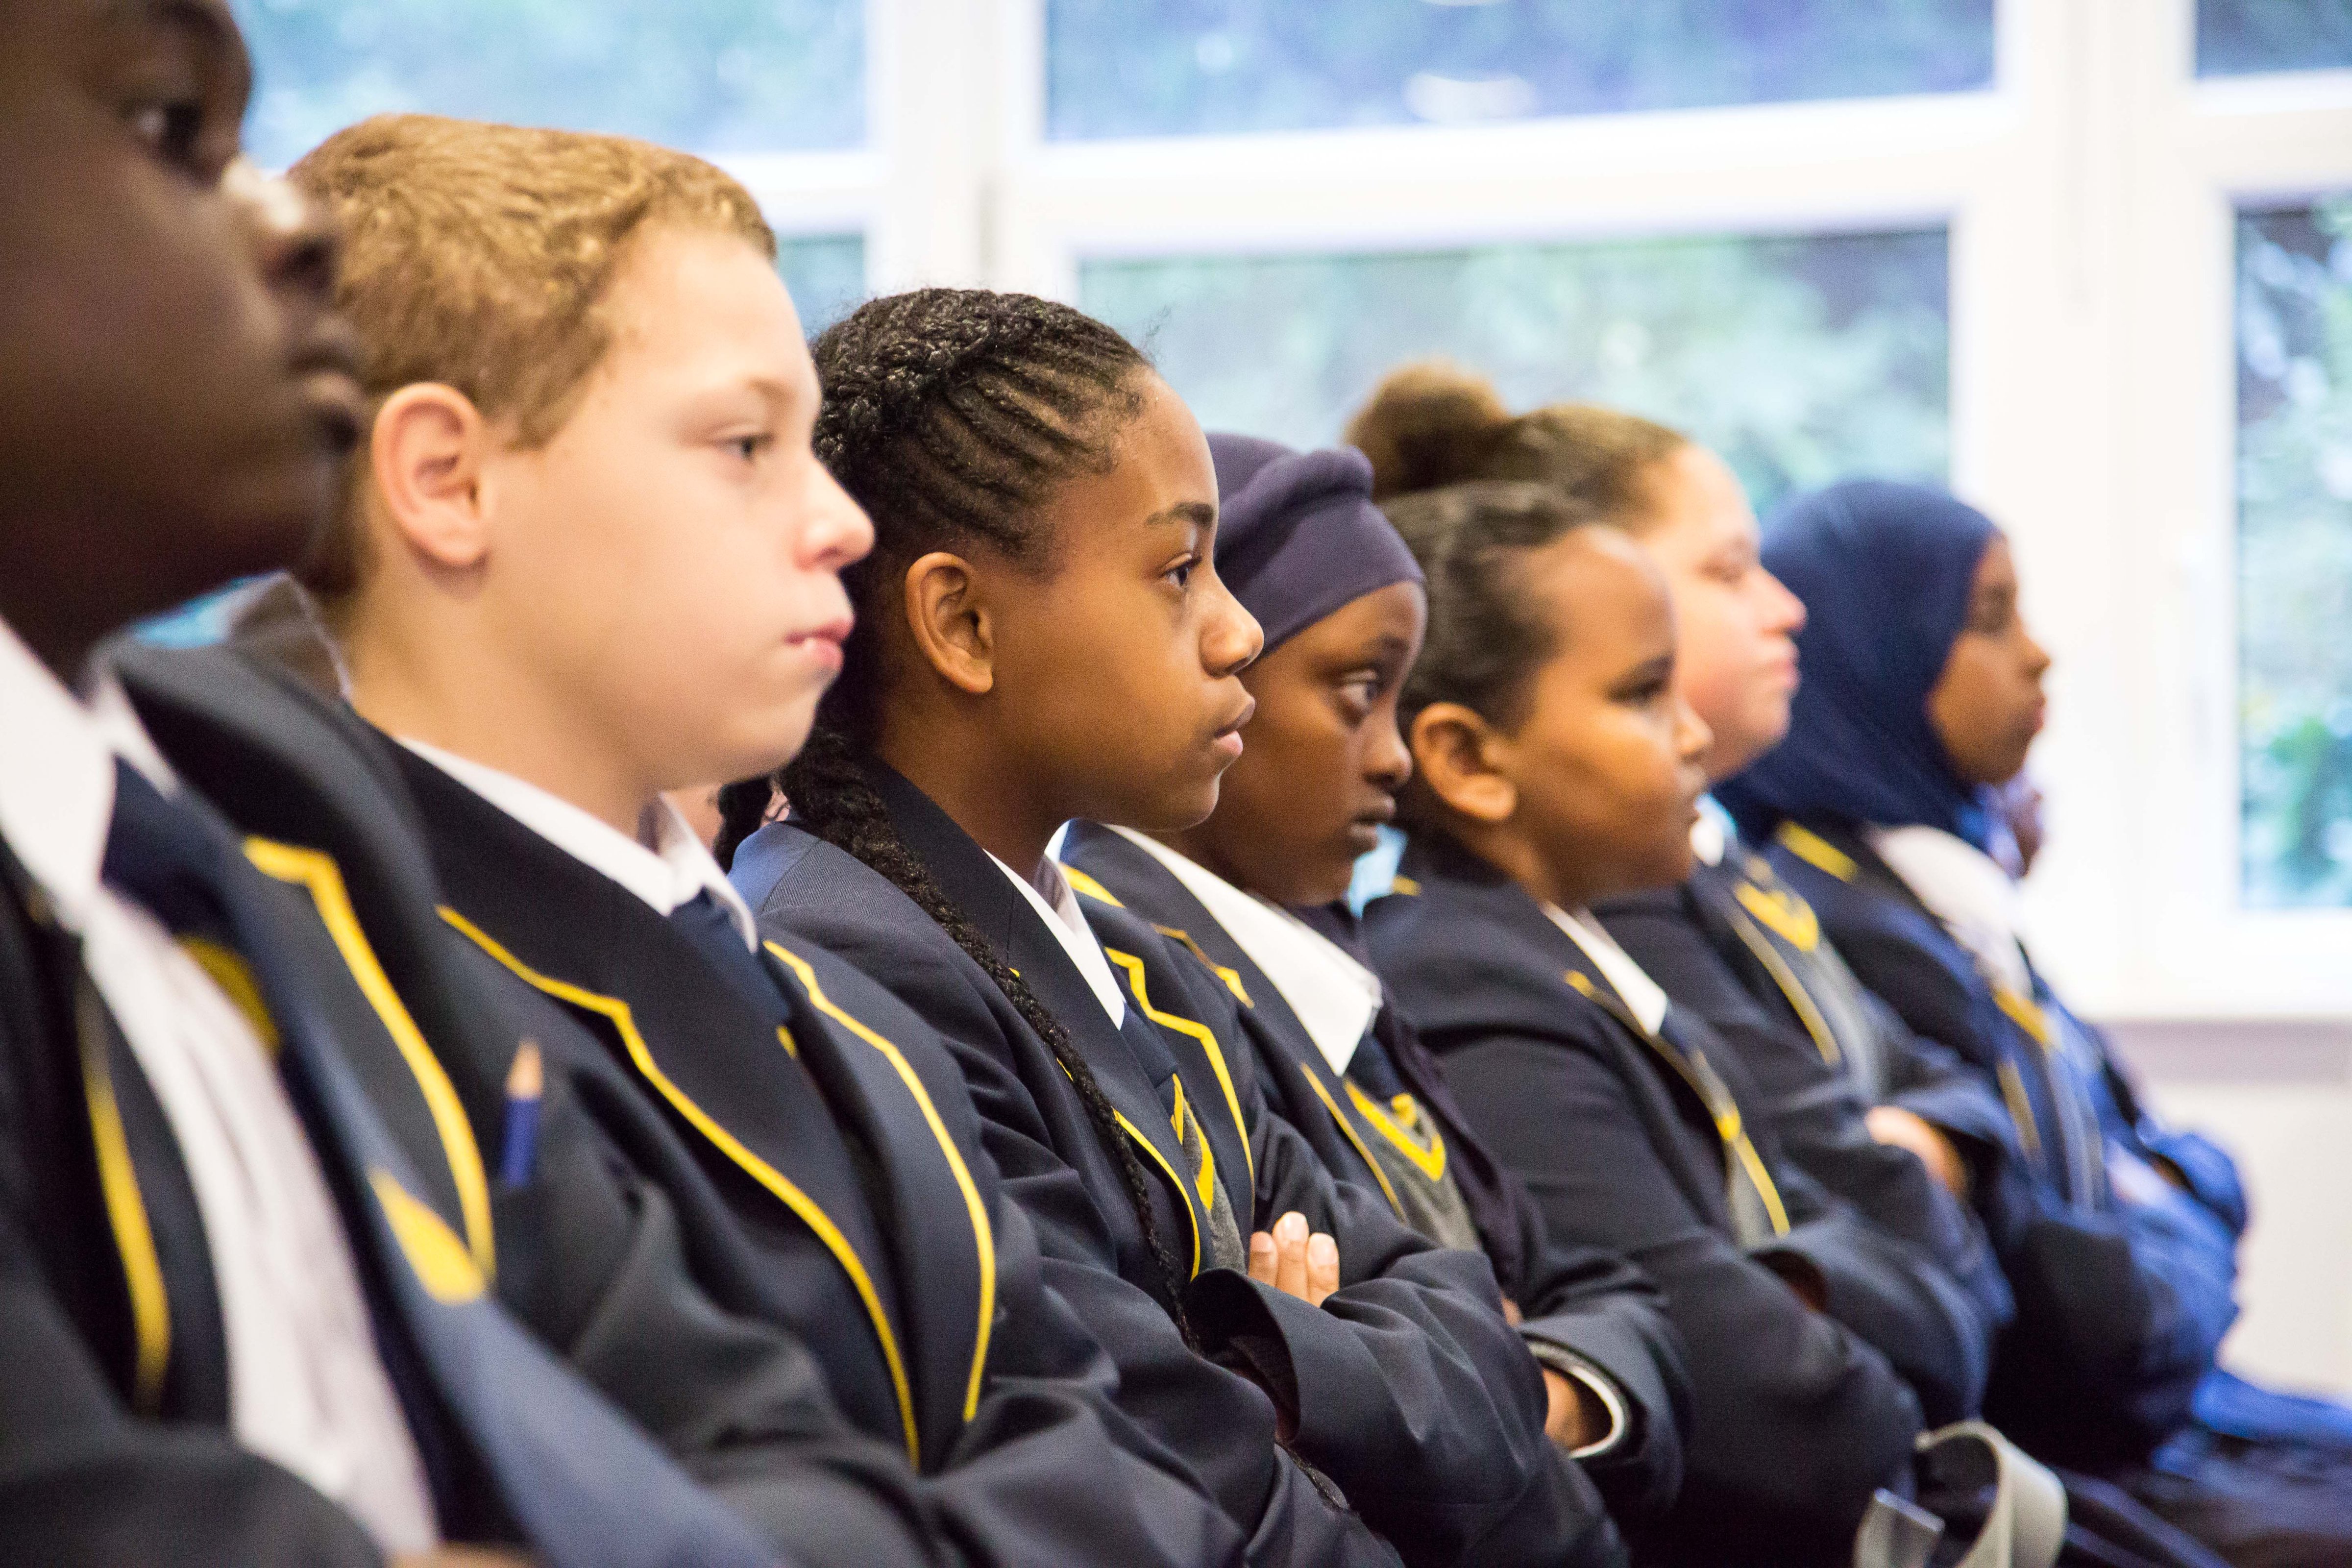 Students attend class at Michaela Community School in London. (Courtesy Michaela Community School)